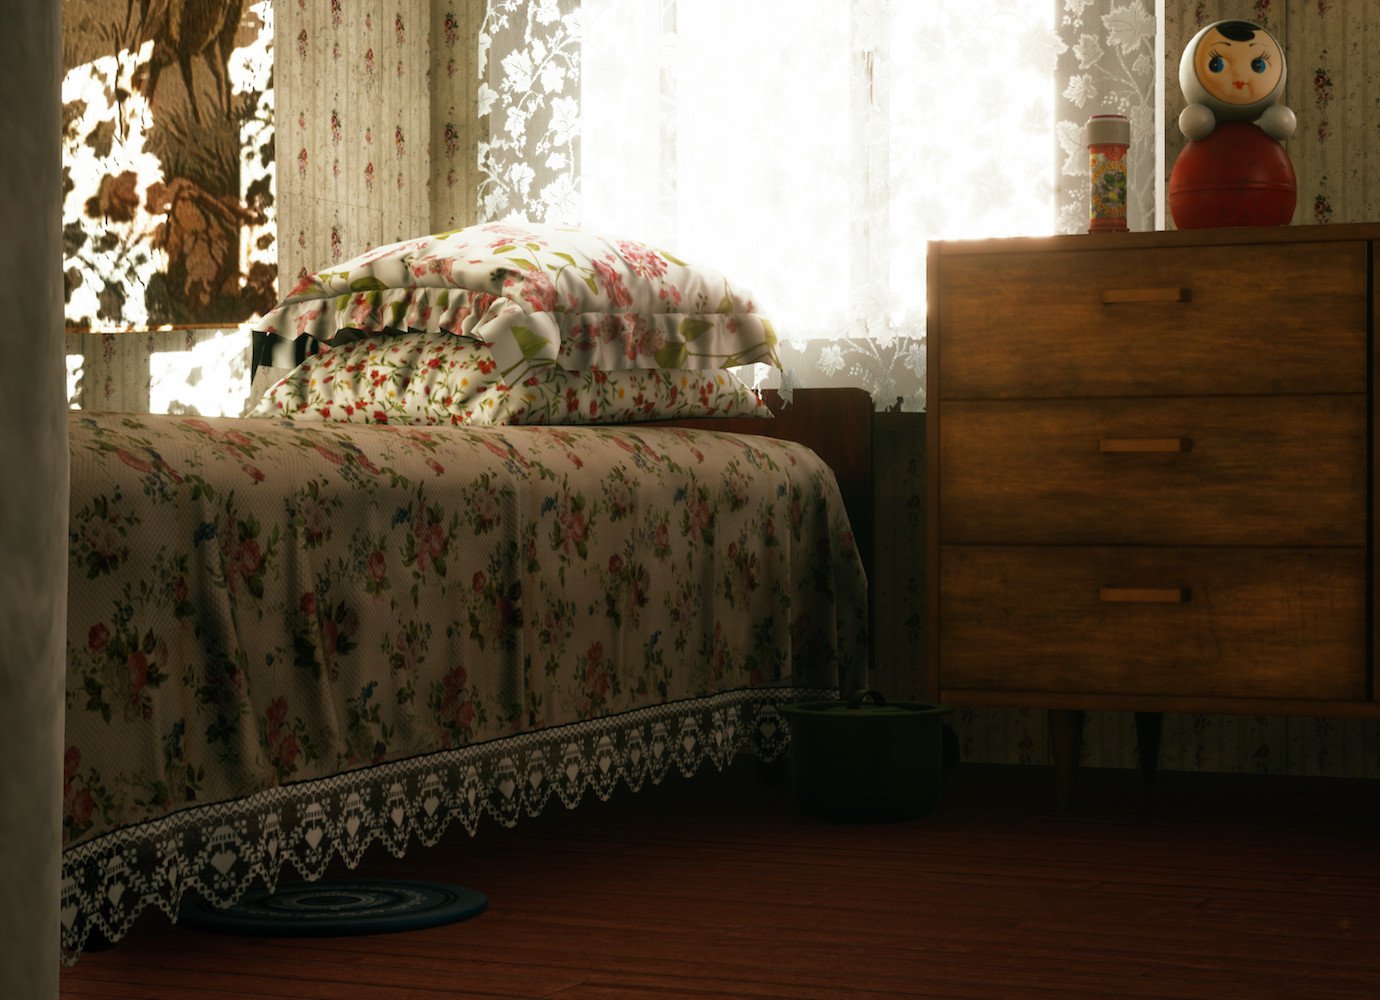 This cosy video game takes you to a Russian dacha for an afternoon nap